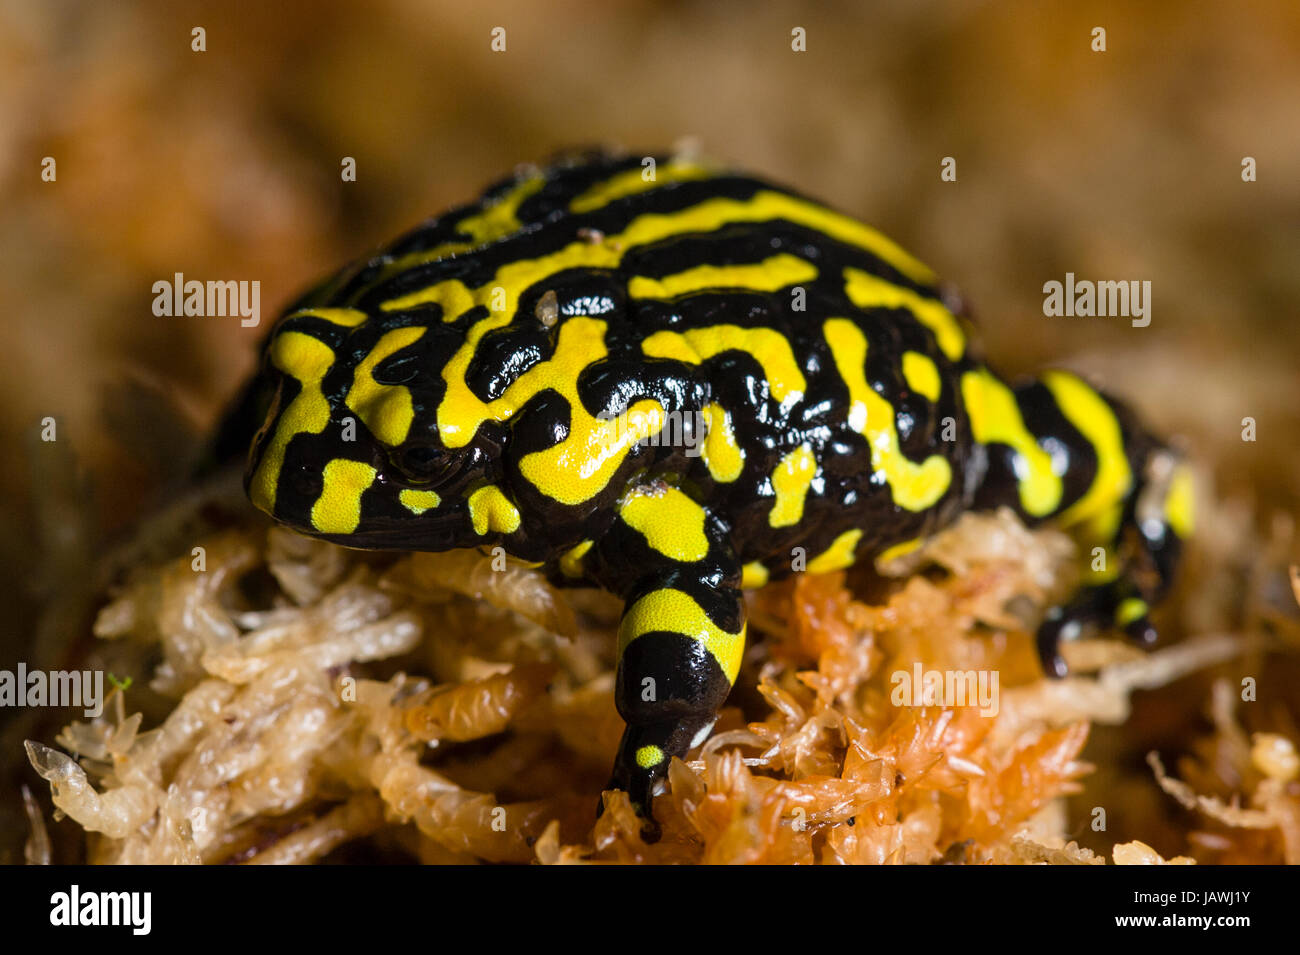 The bright yellow stripes of a critically endangered Corroboree Frog in moss. Stock Photo